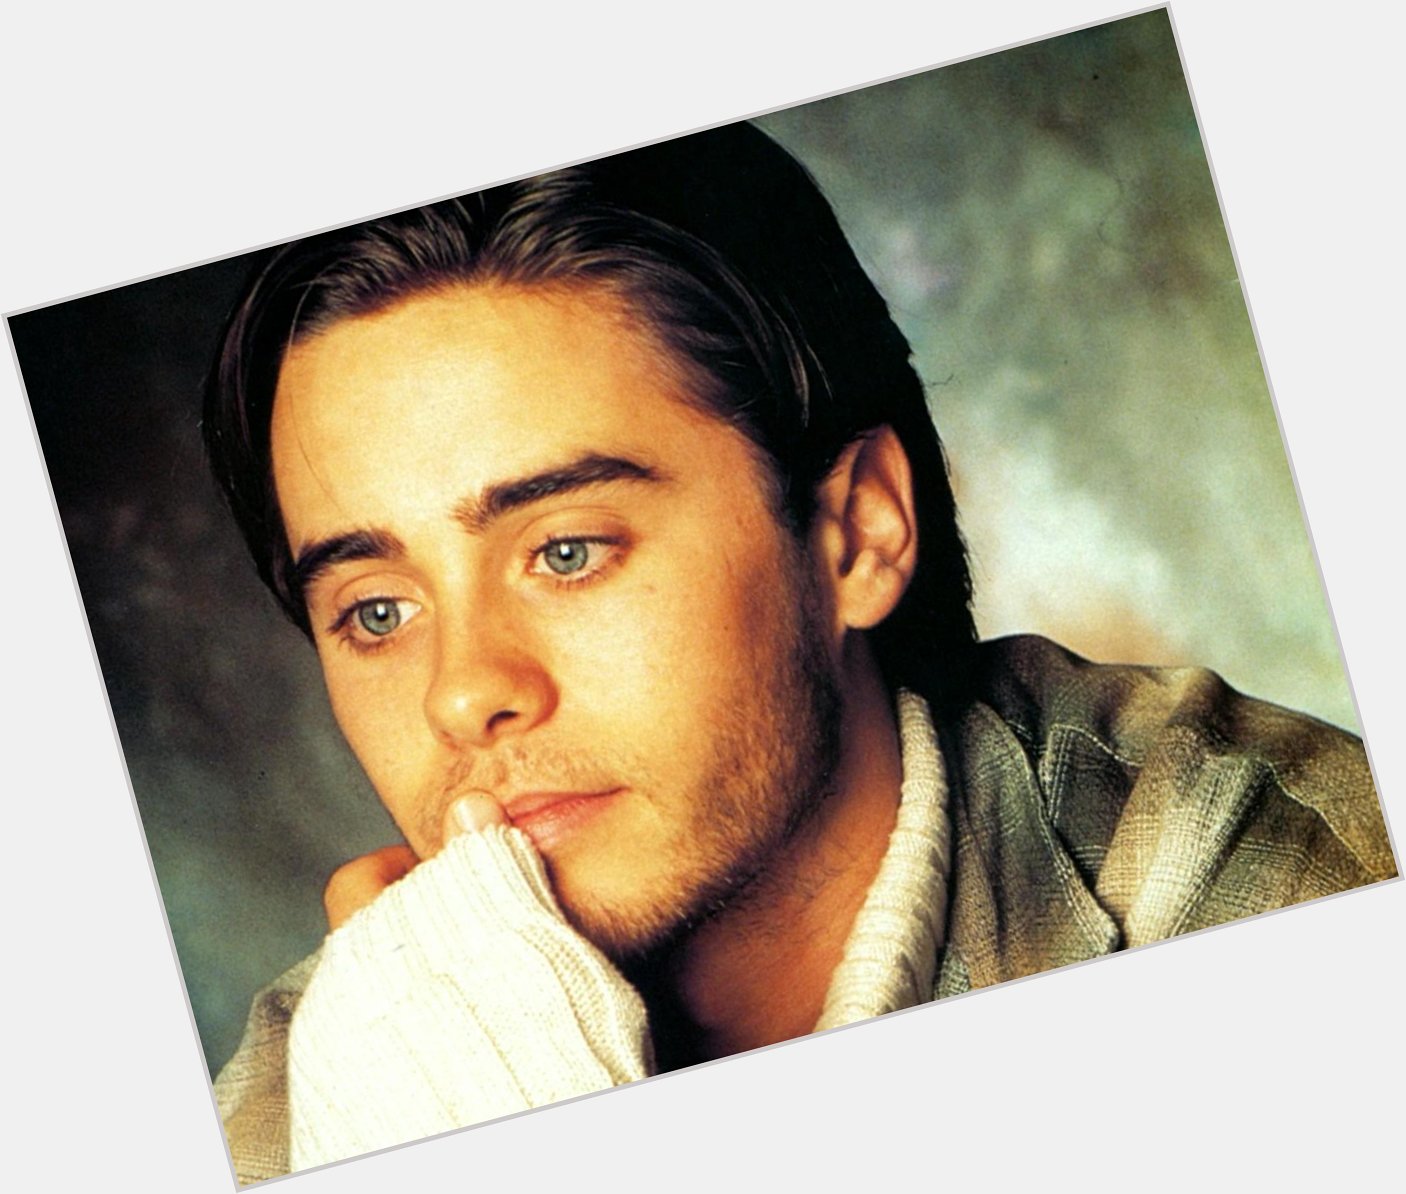 Happy Birthday Jared Leto!!! This is an amazing day, aaand you look like you\re always eighteen!:DD 